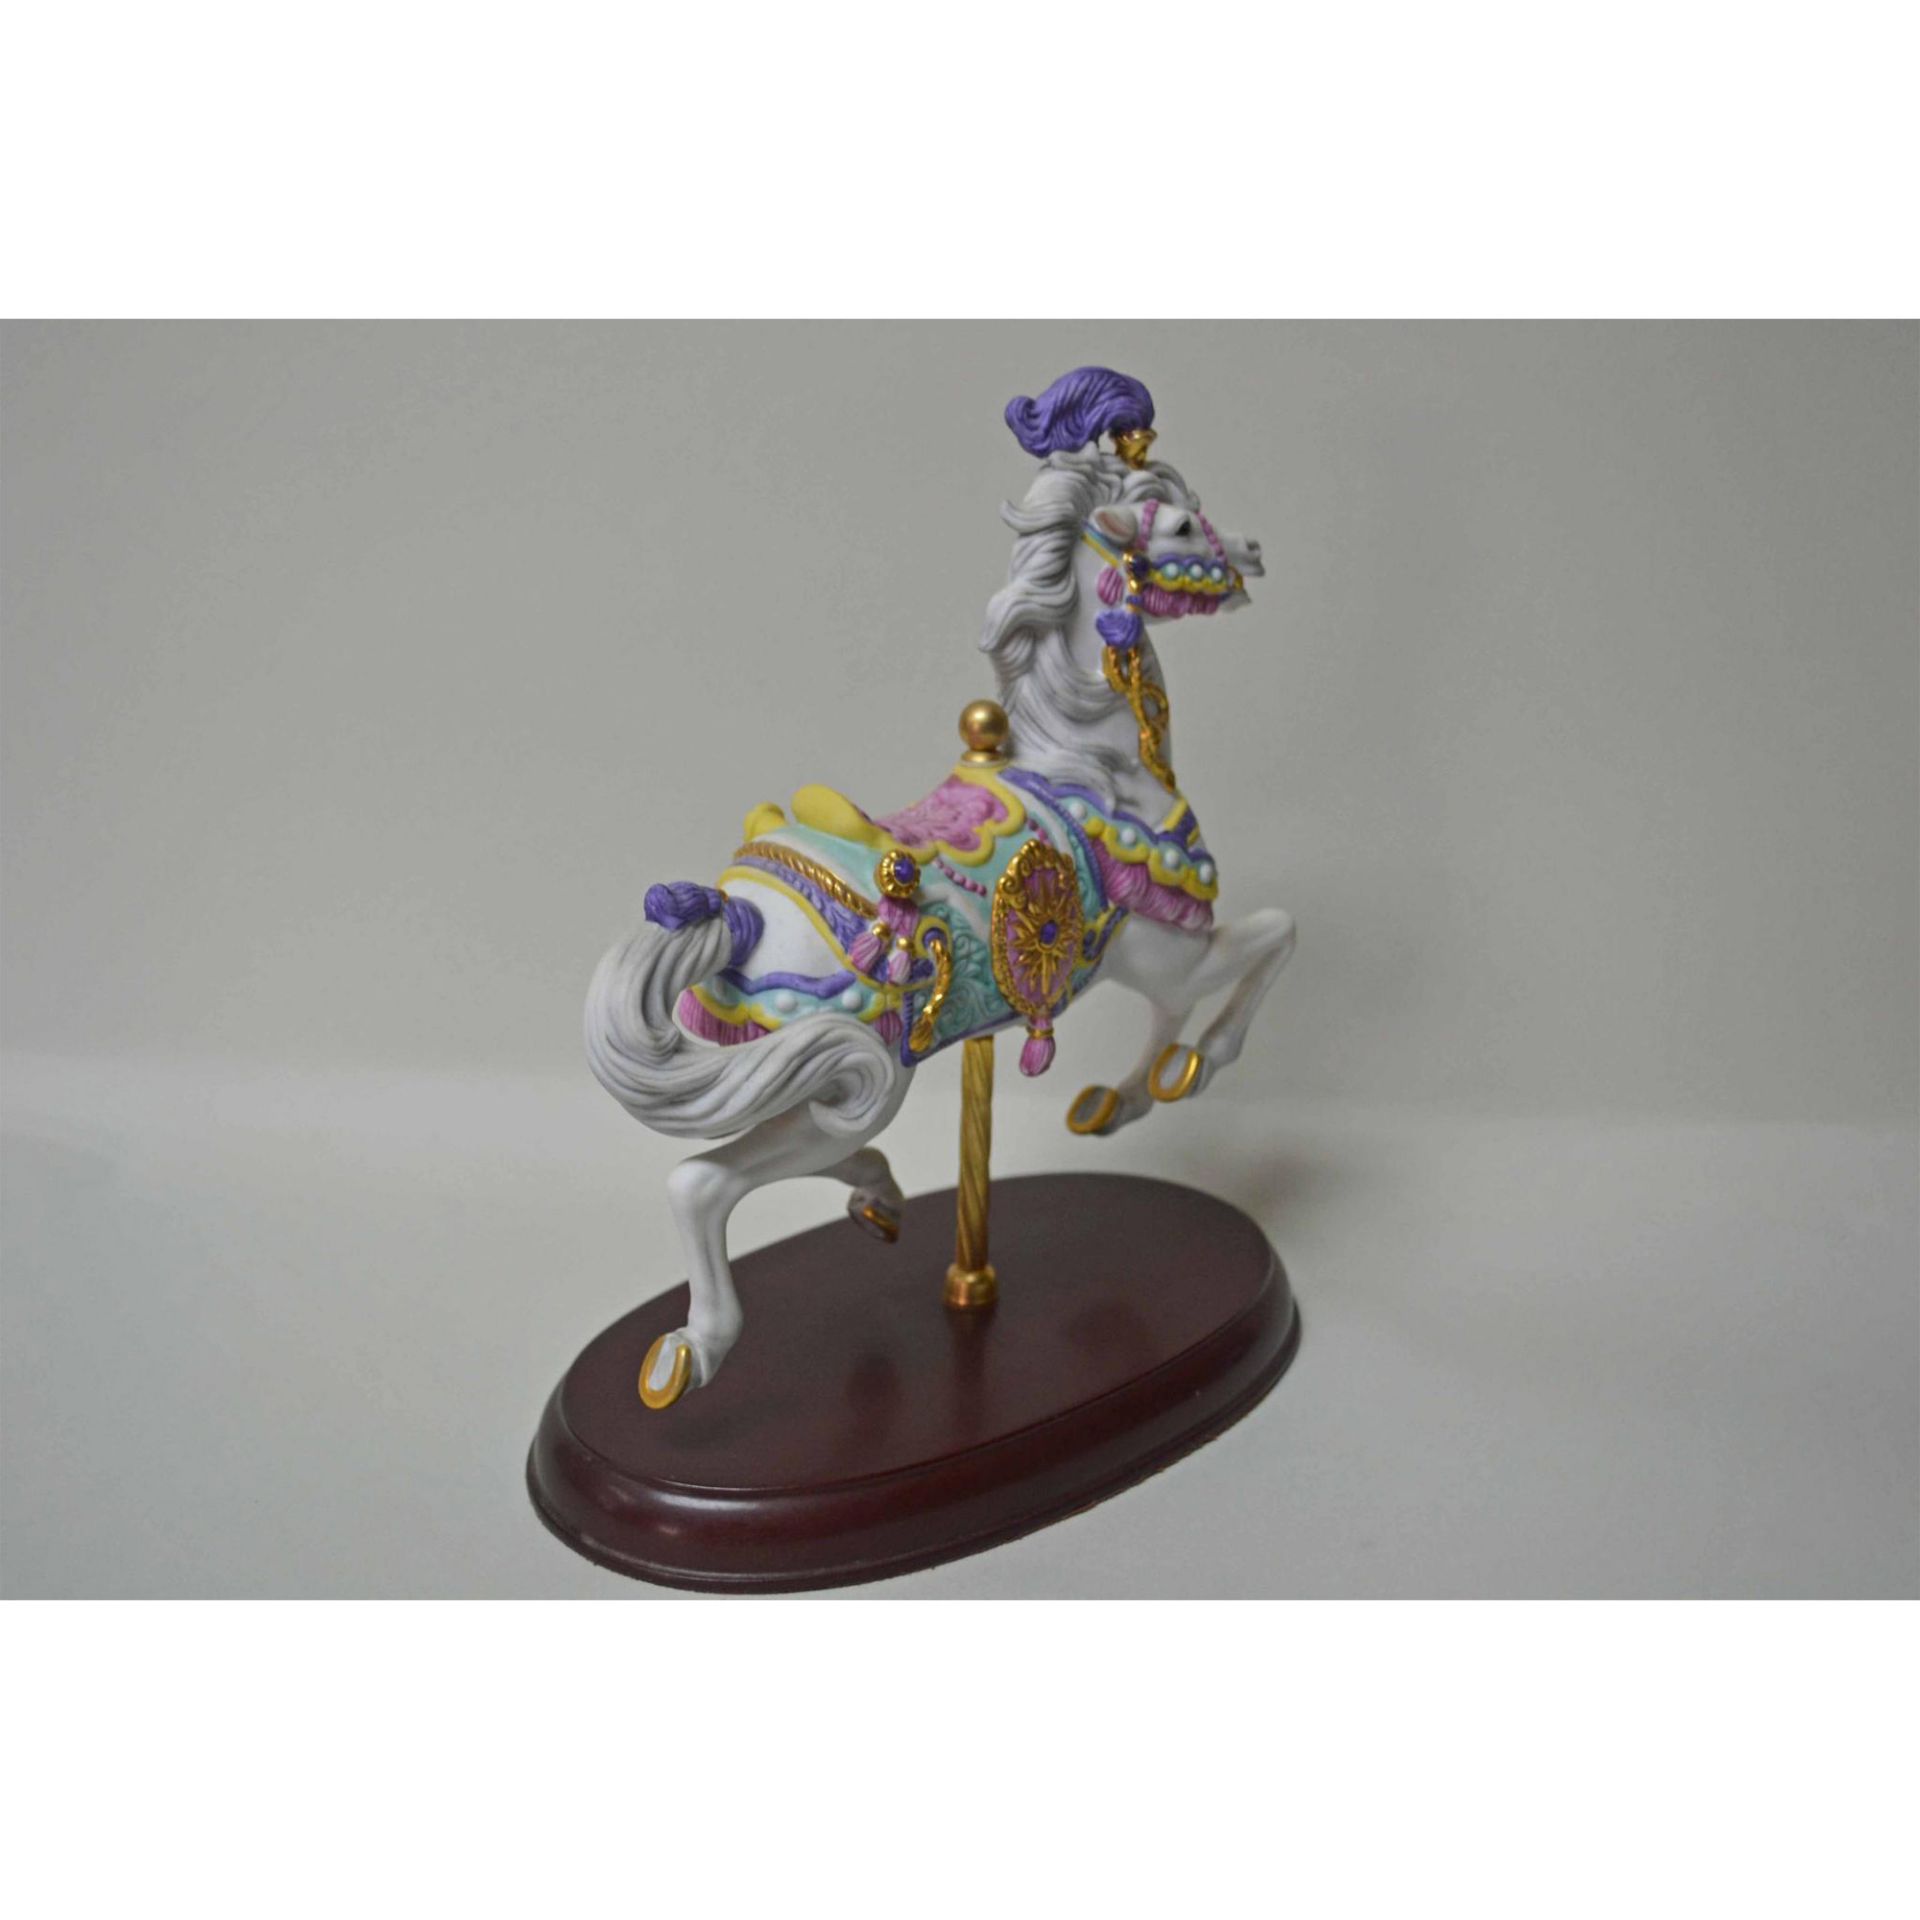 Lenox Vintage 1990 Carousel Charger Horse Figurine - Image 3 of 4